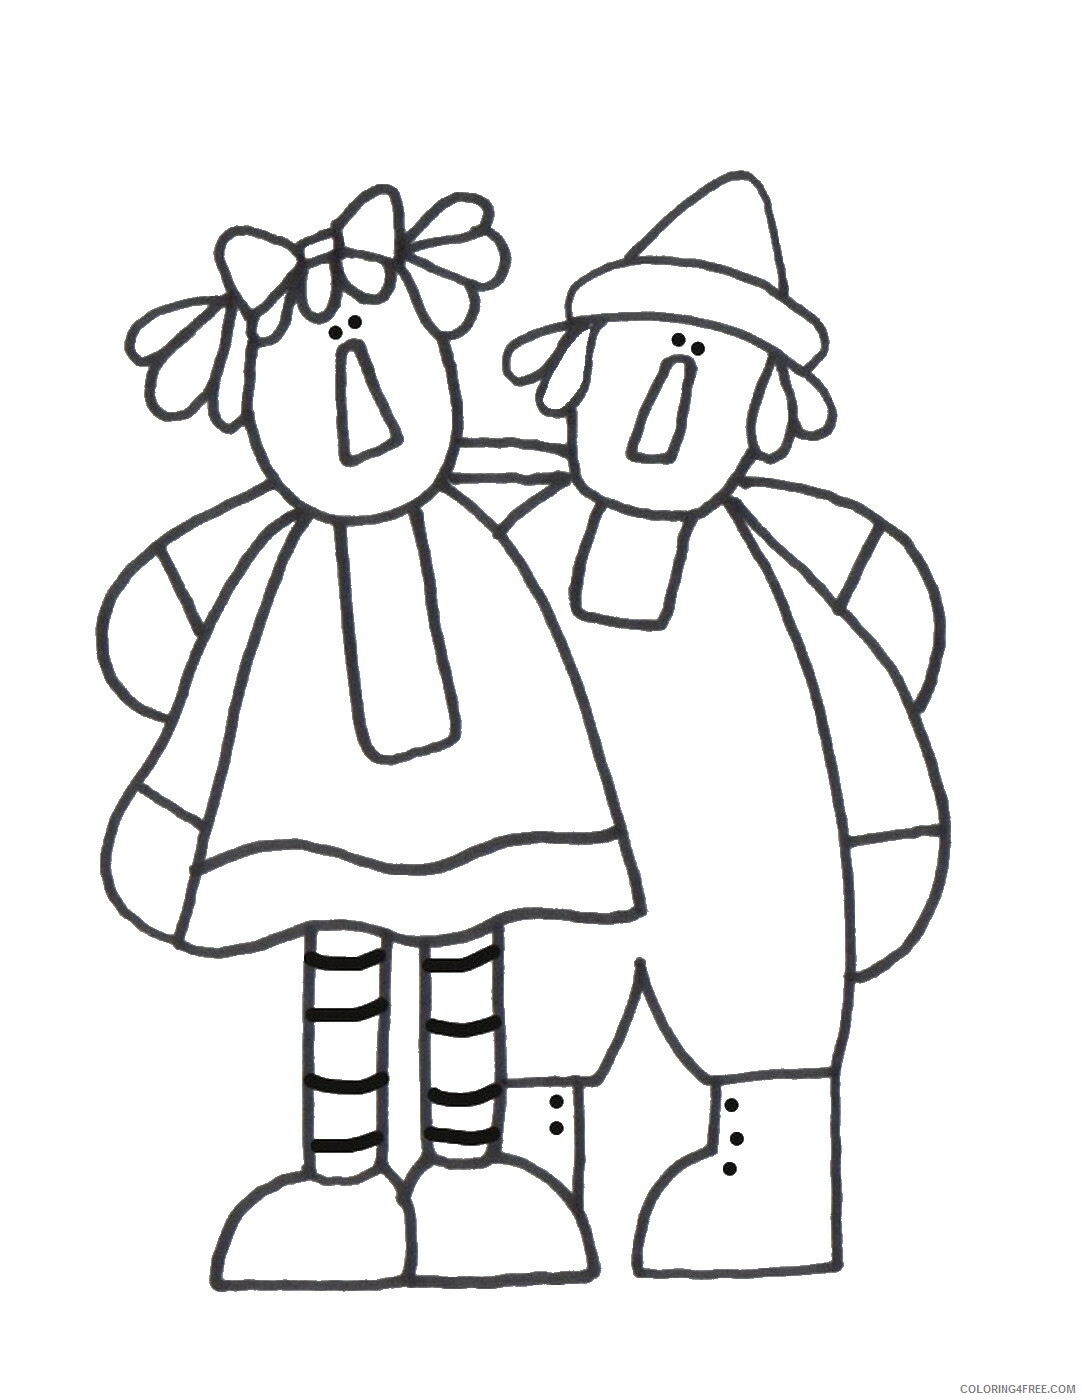 Doll Coloring Pages for Girls dolls_30 Printable 2021 0381 Coloring4free